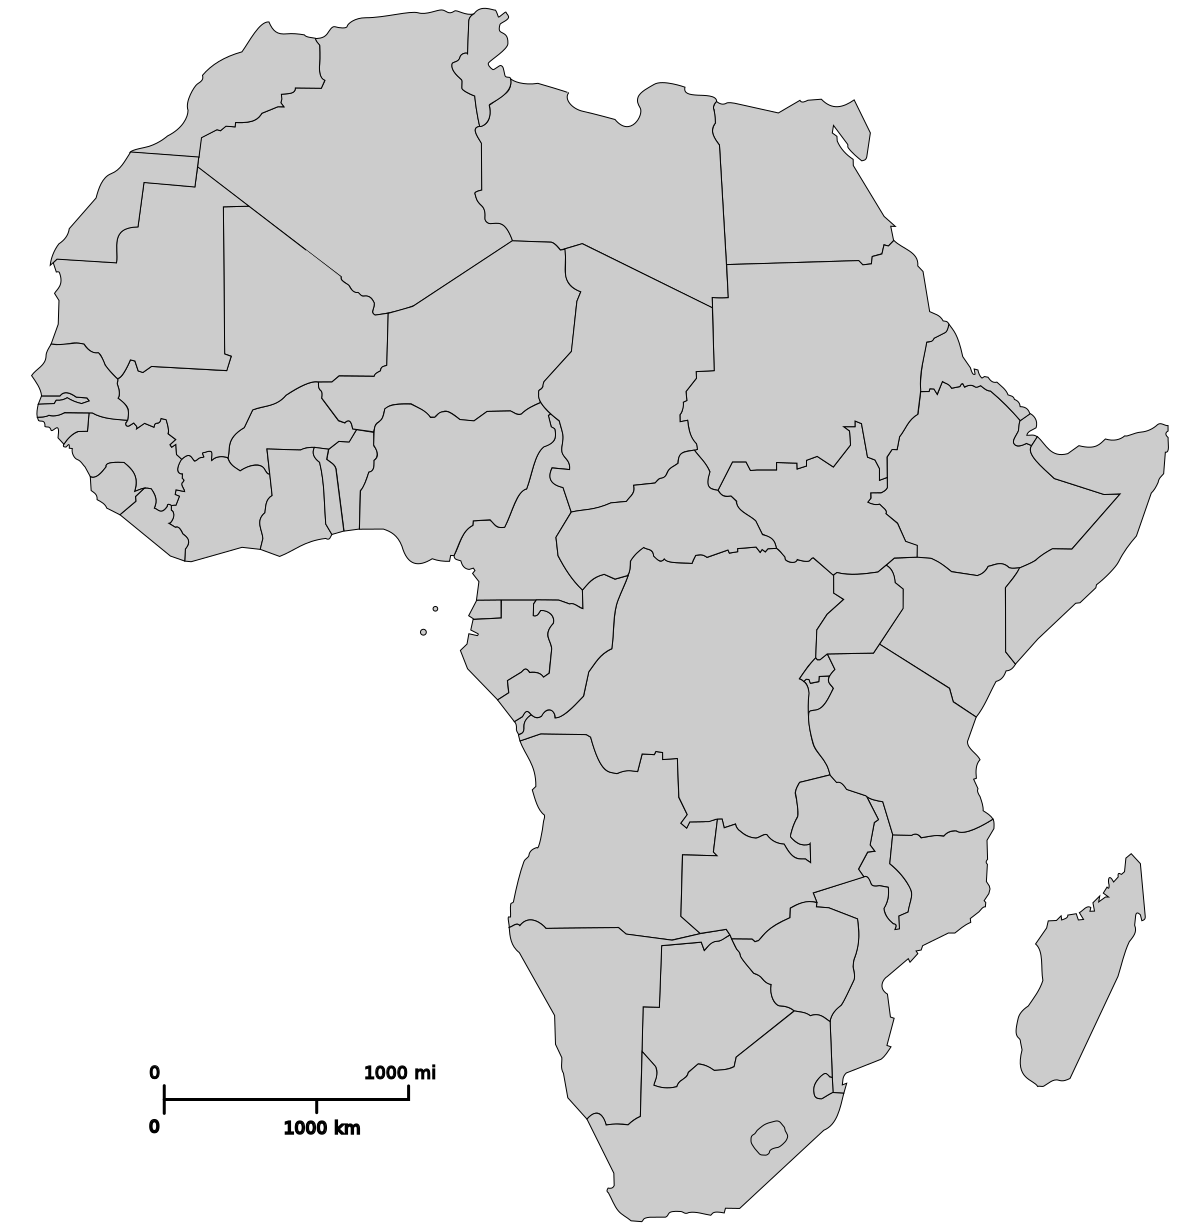 Grey Africa Map PNG HD Quality